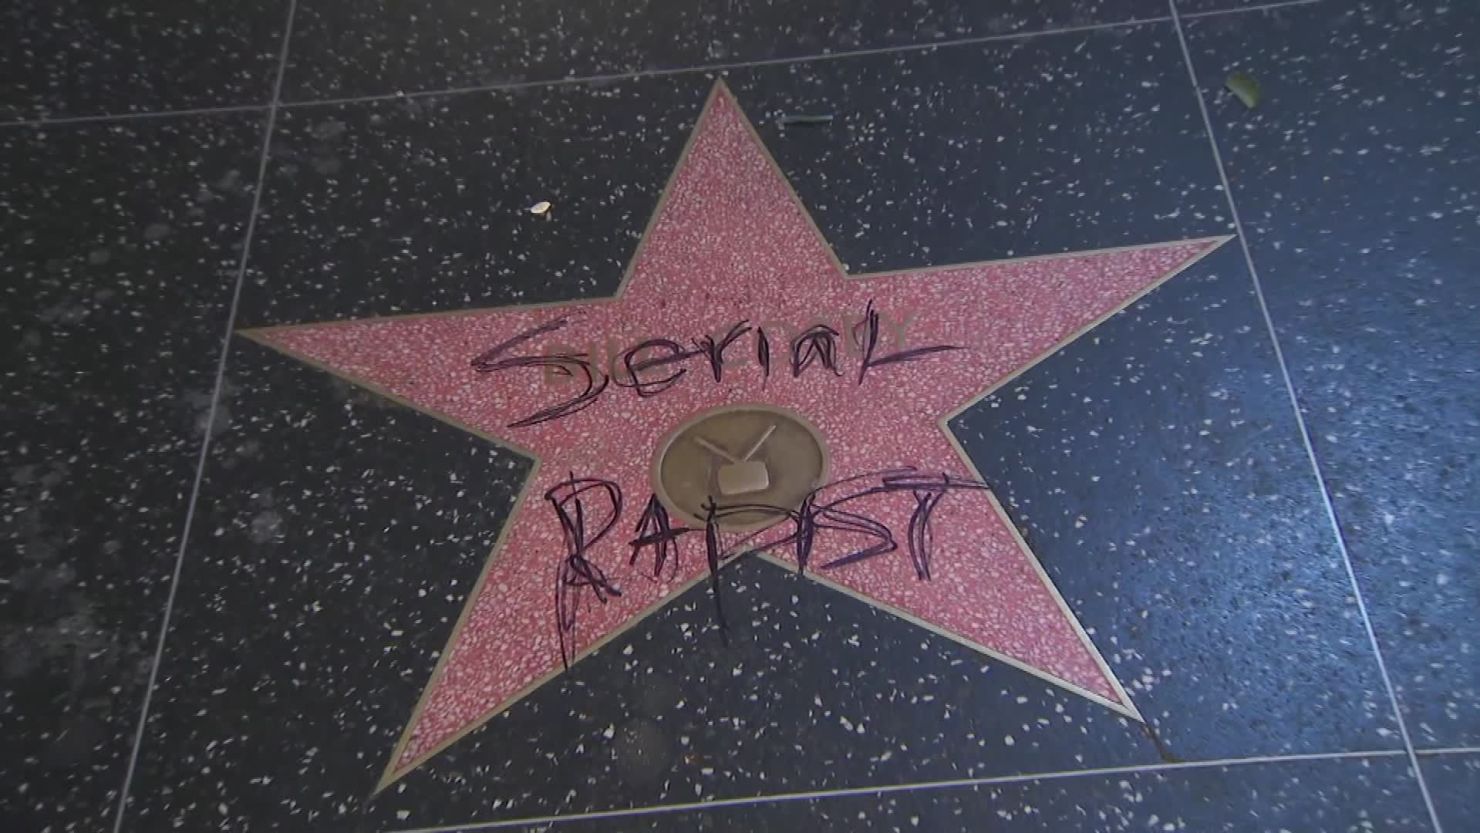 Someone defaced Bill Cosby's star in Hollywood on Monday night.